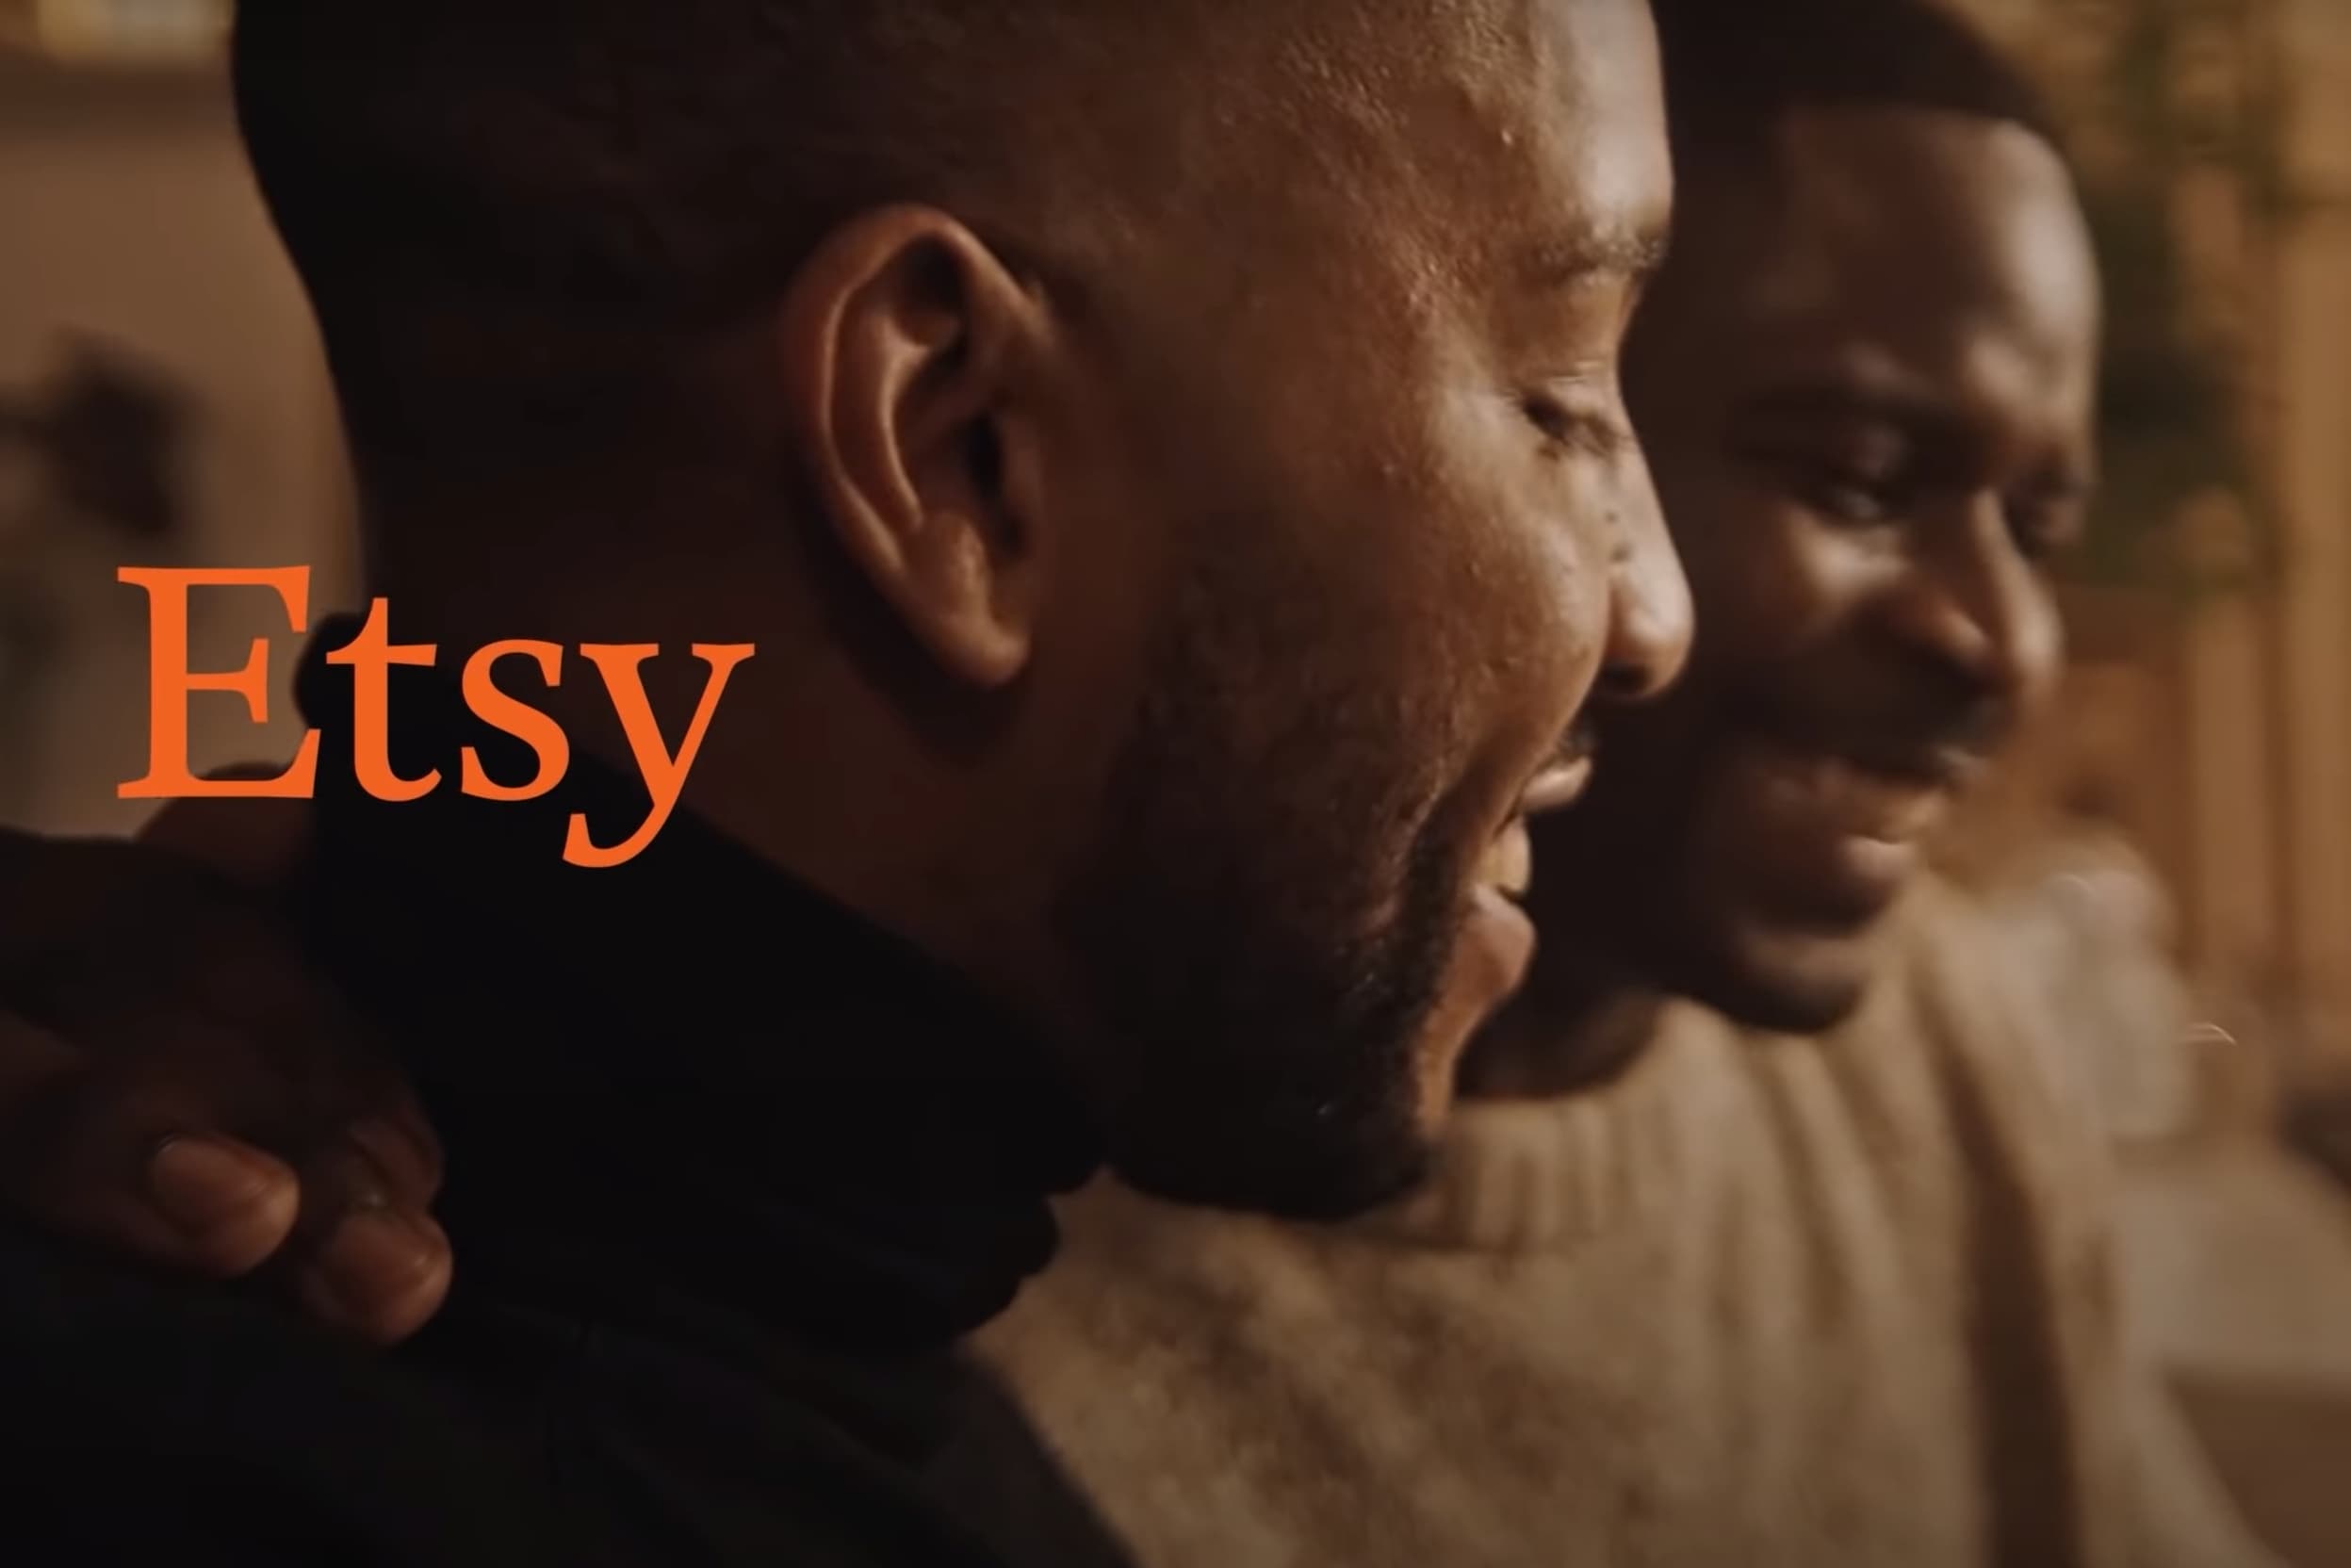 Etsy releases uplifting holiday ad featuring Black gay couple Metro